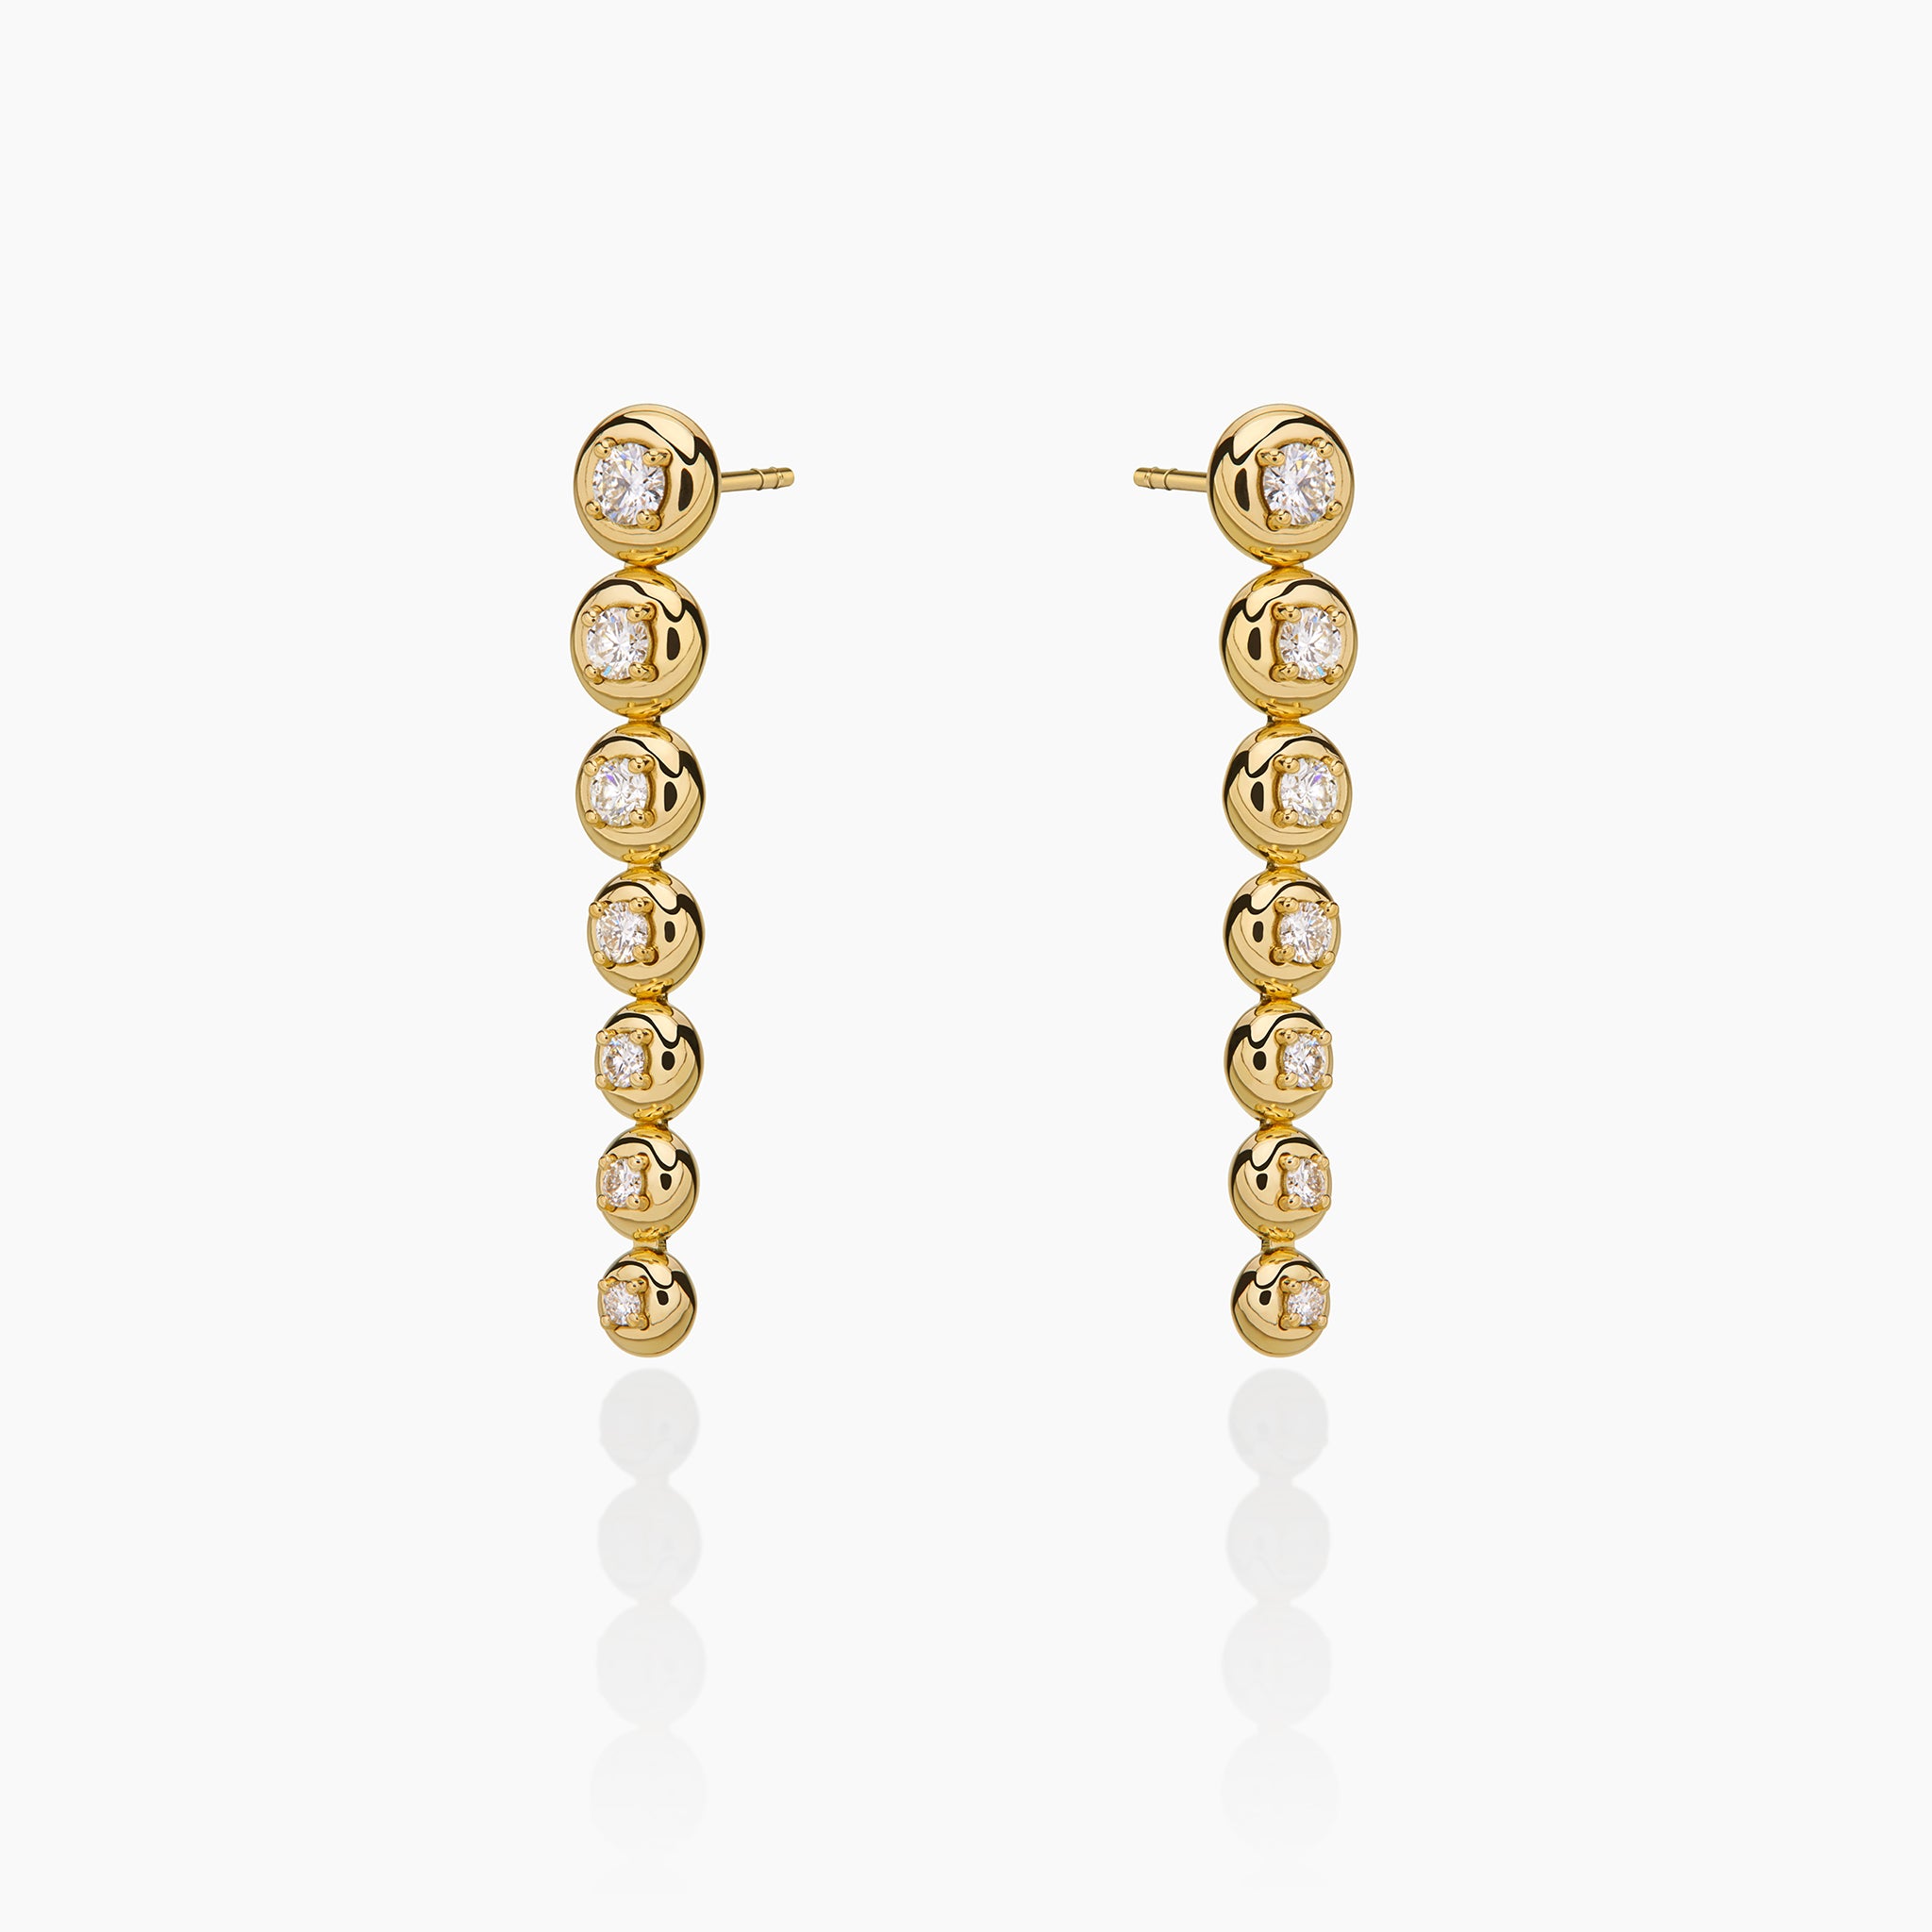 Star trail earrings in yellow gold adorned with diamonds displayed on an off white background. 